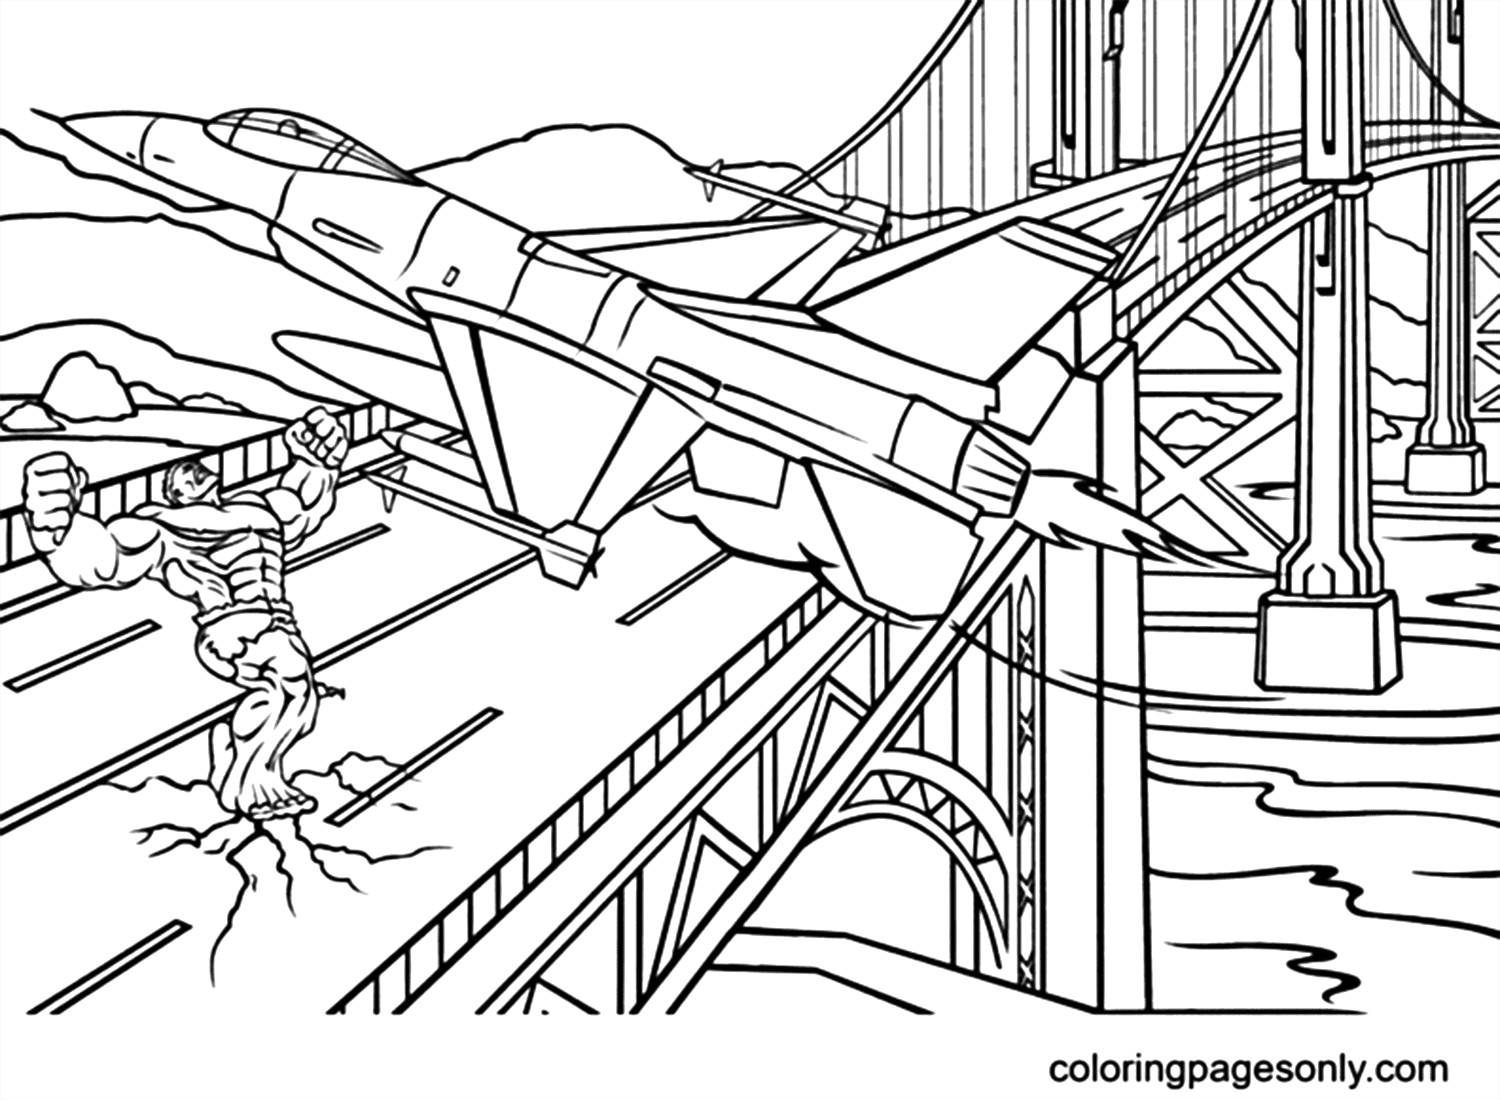 Hulk On The Bridge Coloring Pages